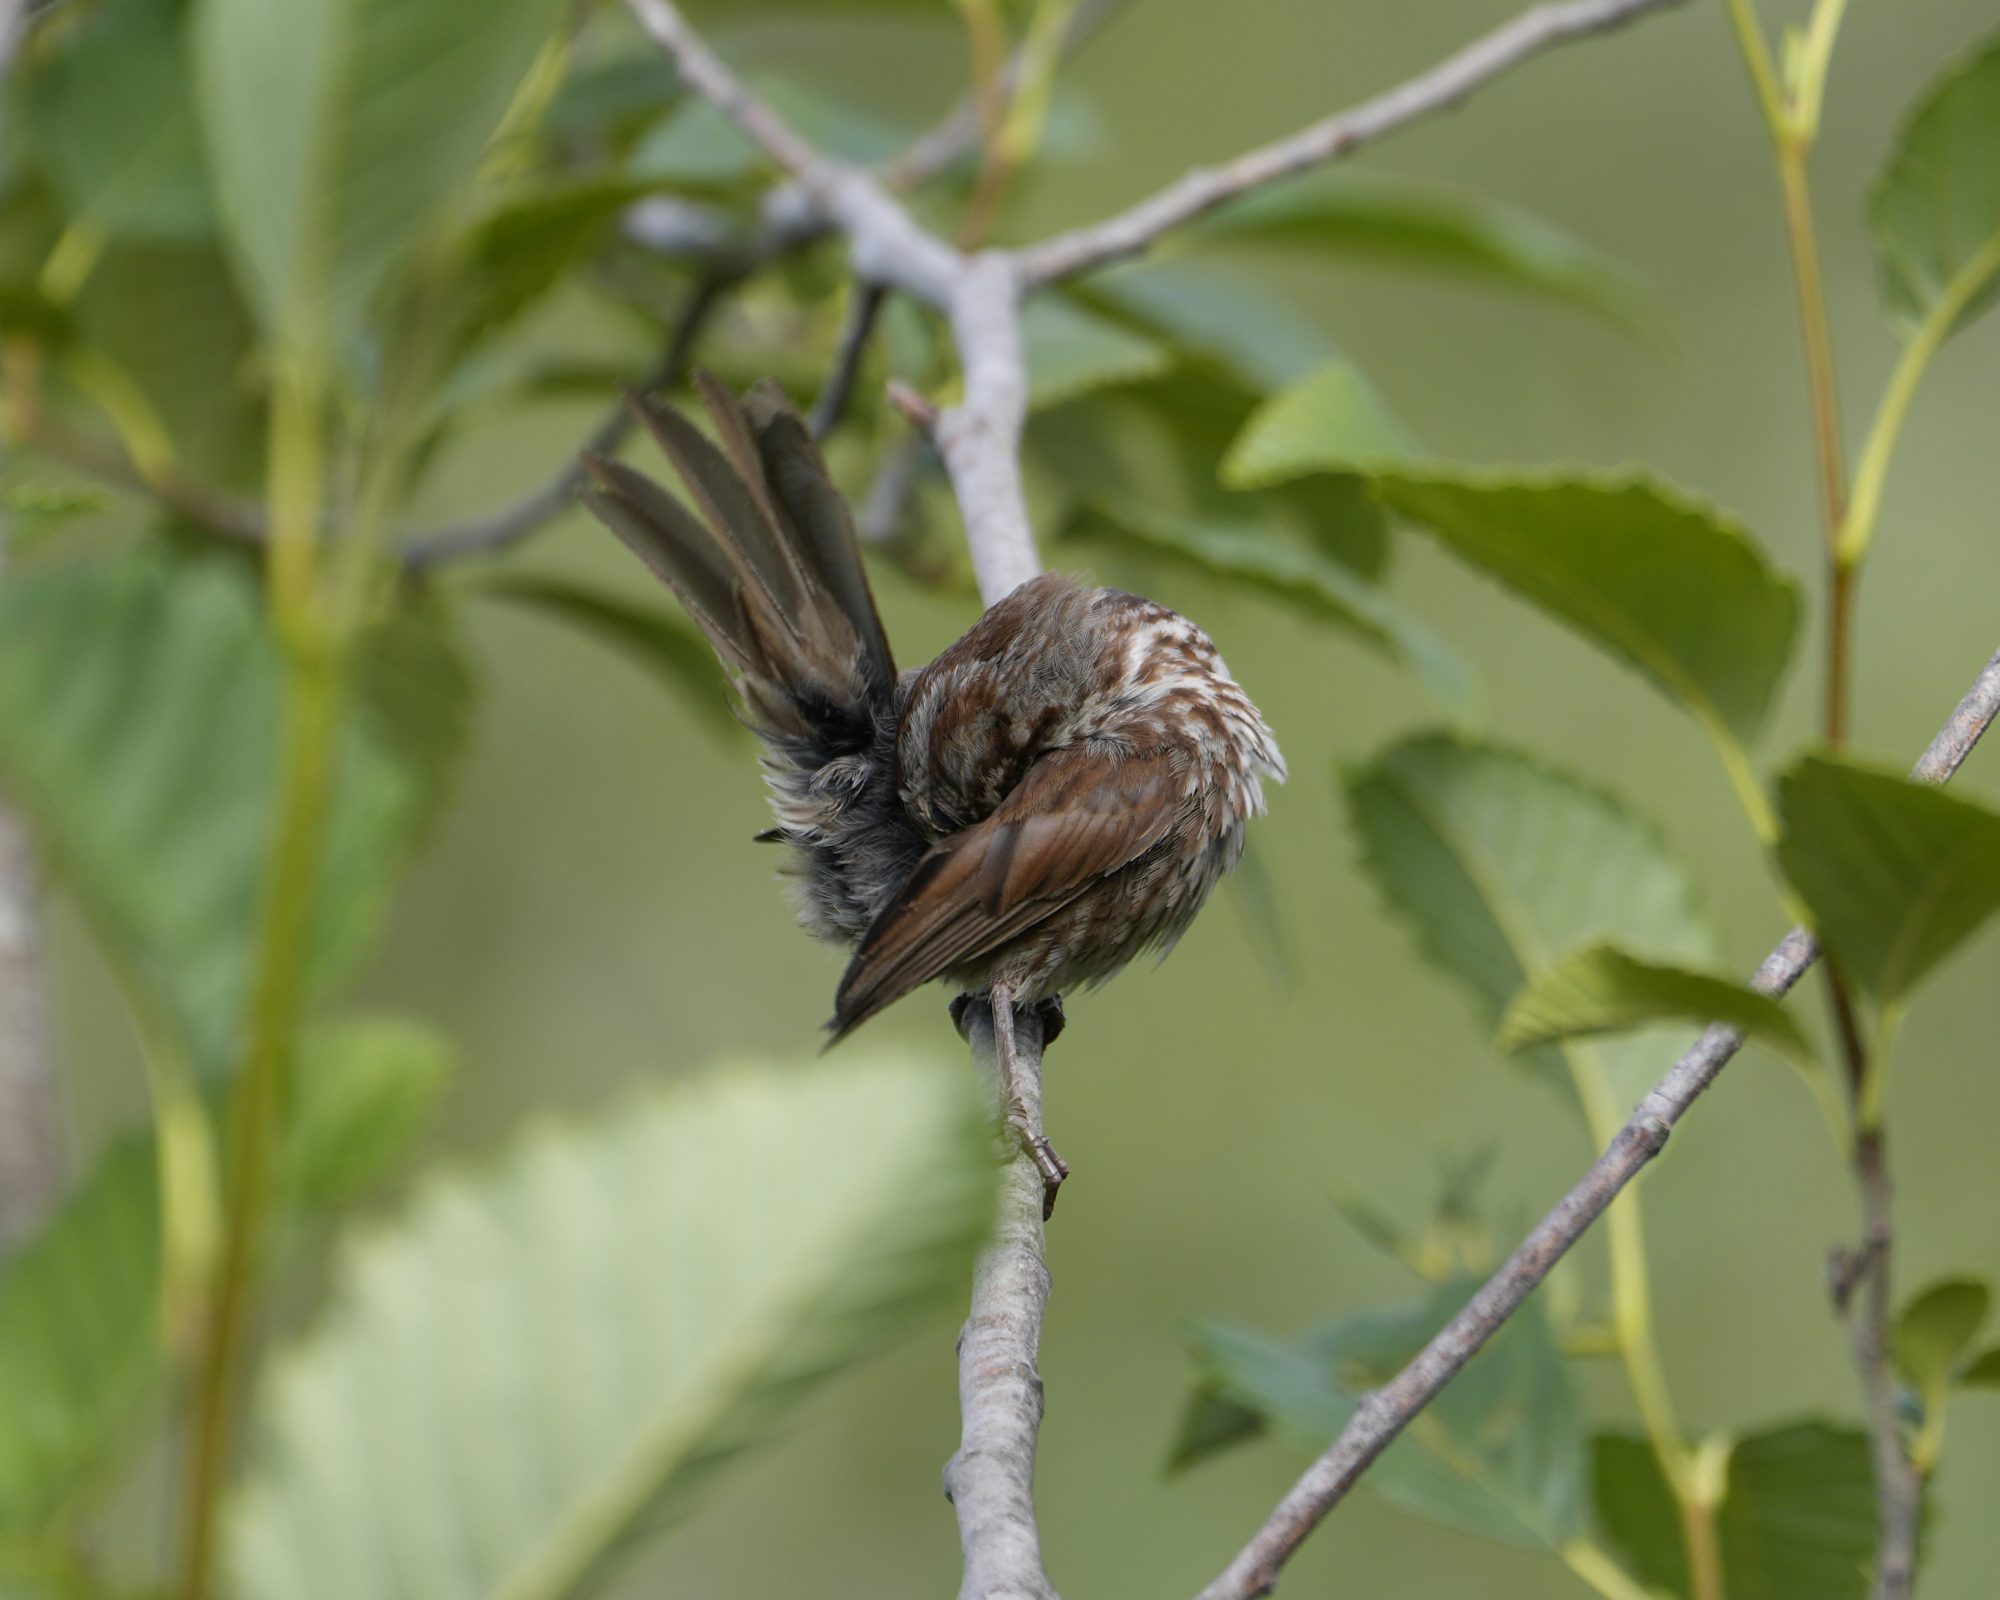 A Song Sparrow is sitting on a branch, preening. Its body is all twisted as it works on its rump, and tail feathers are sticking straight out